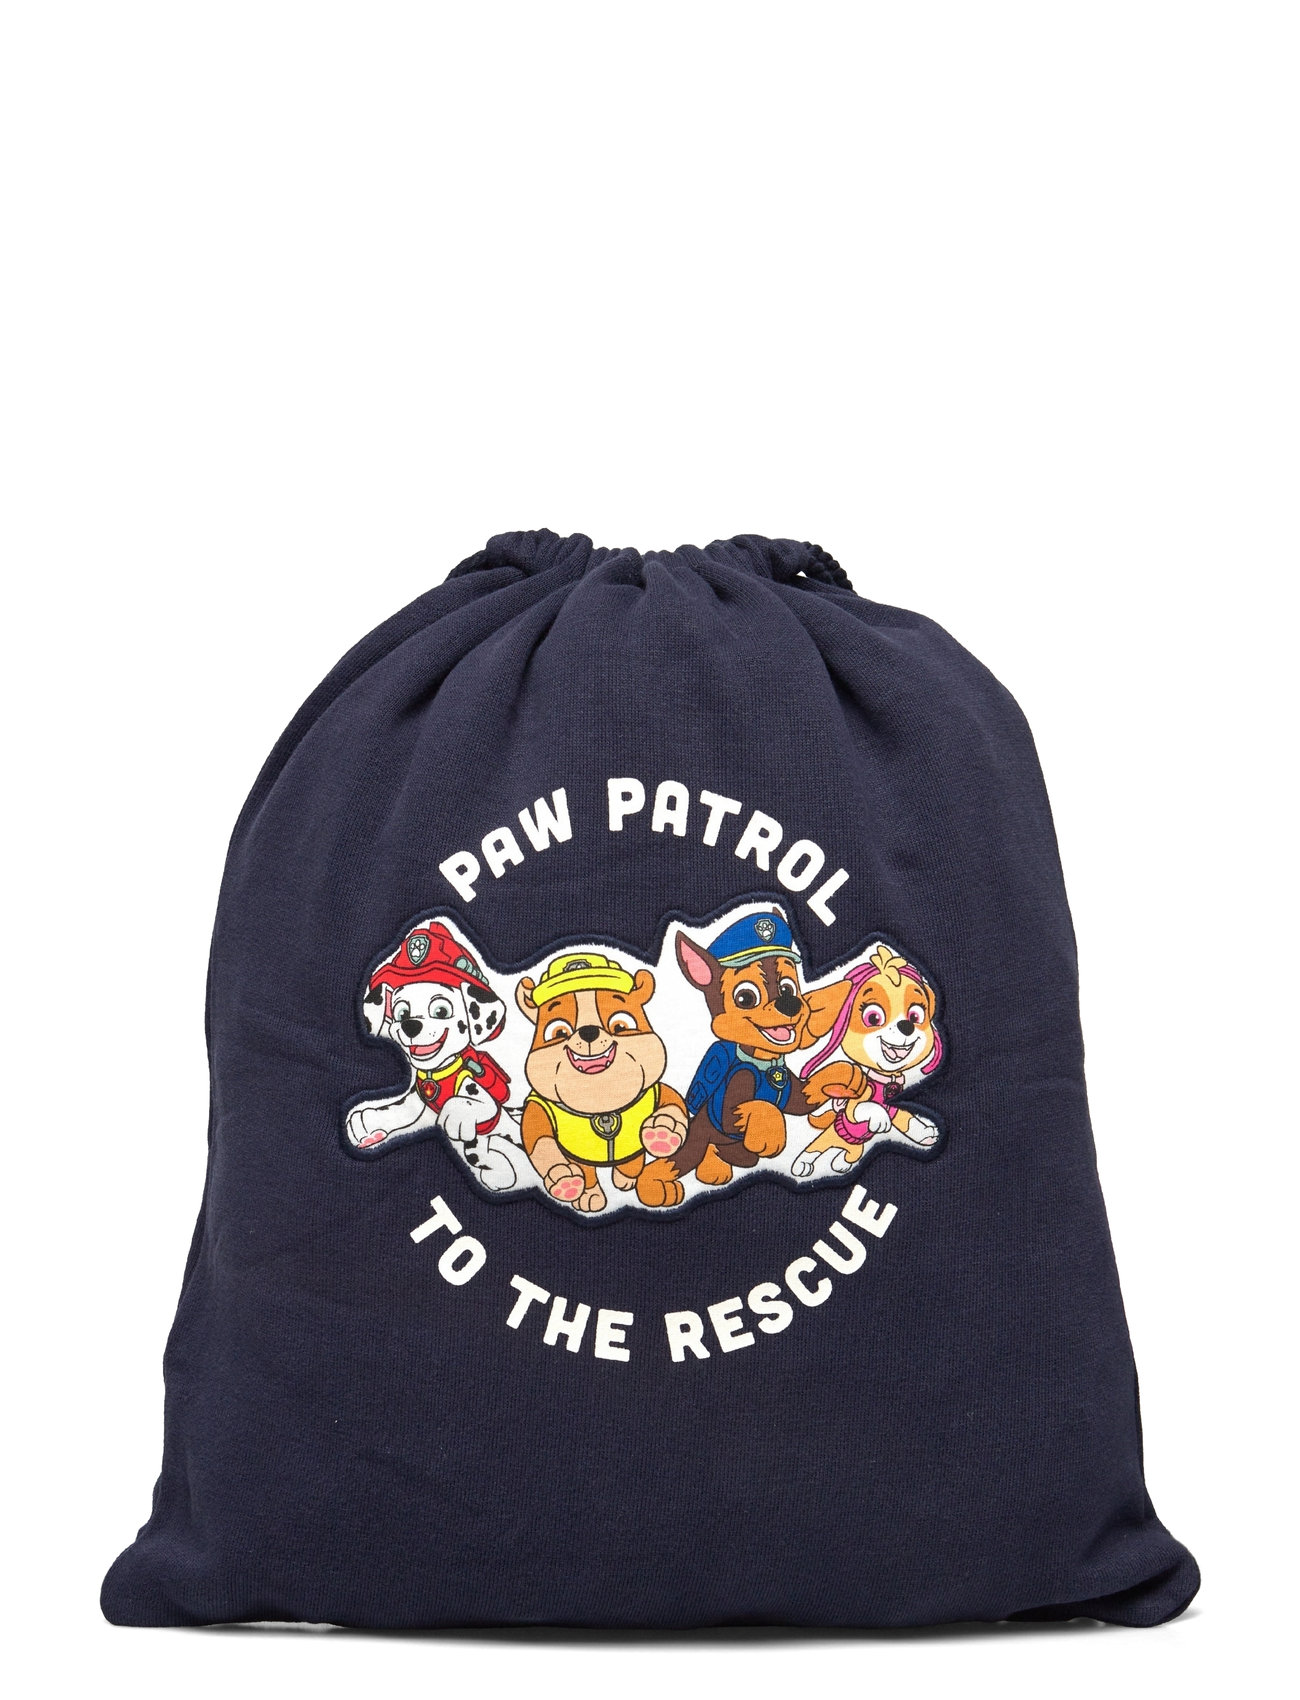 Paw Patrol Backpack Accessories Bags Sports Bags Navy Mango